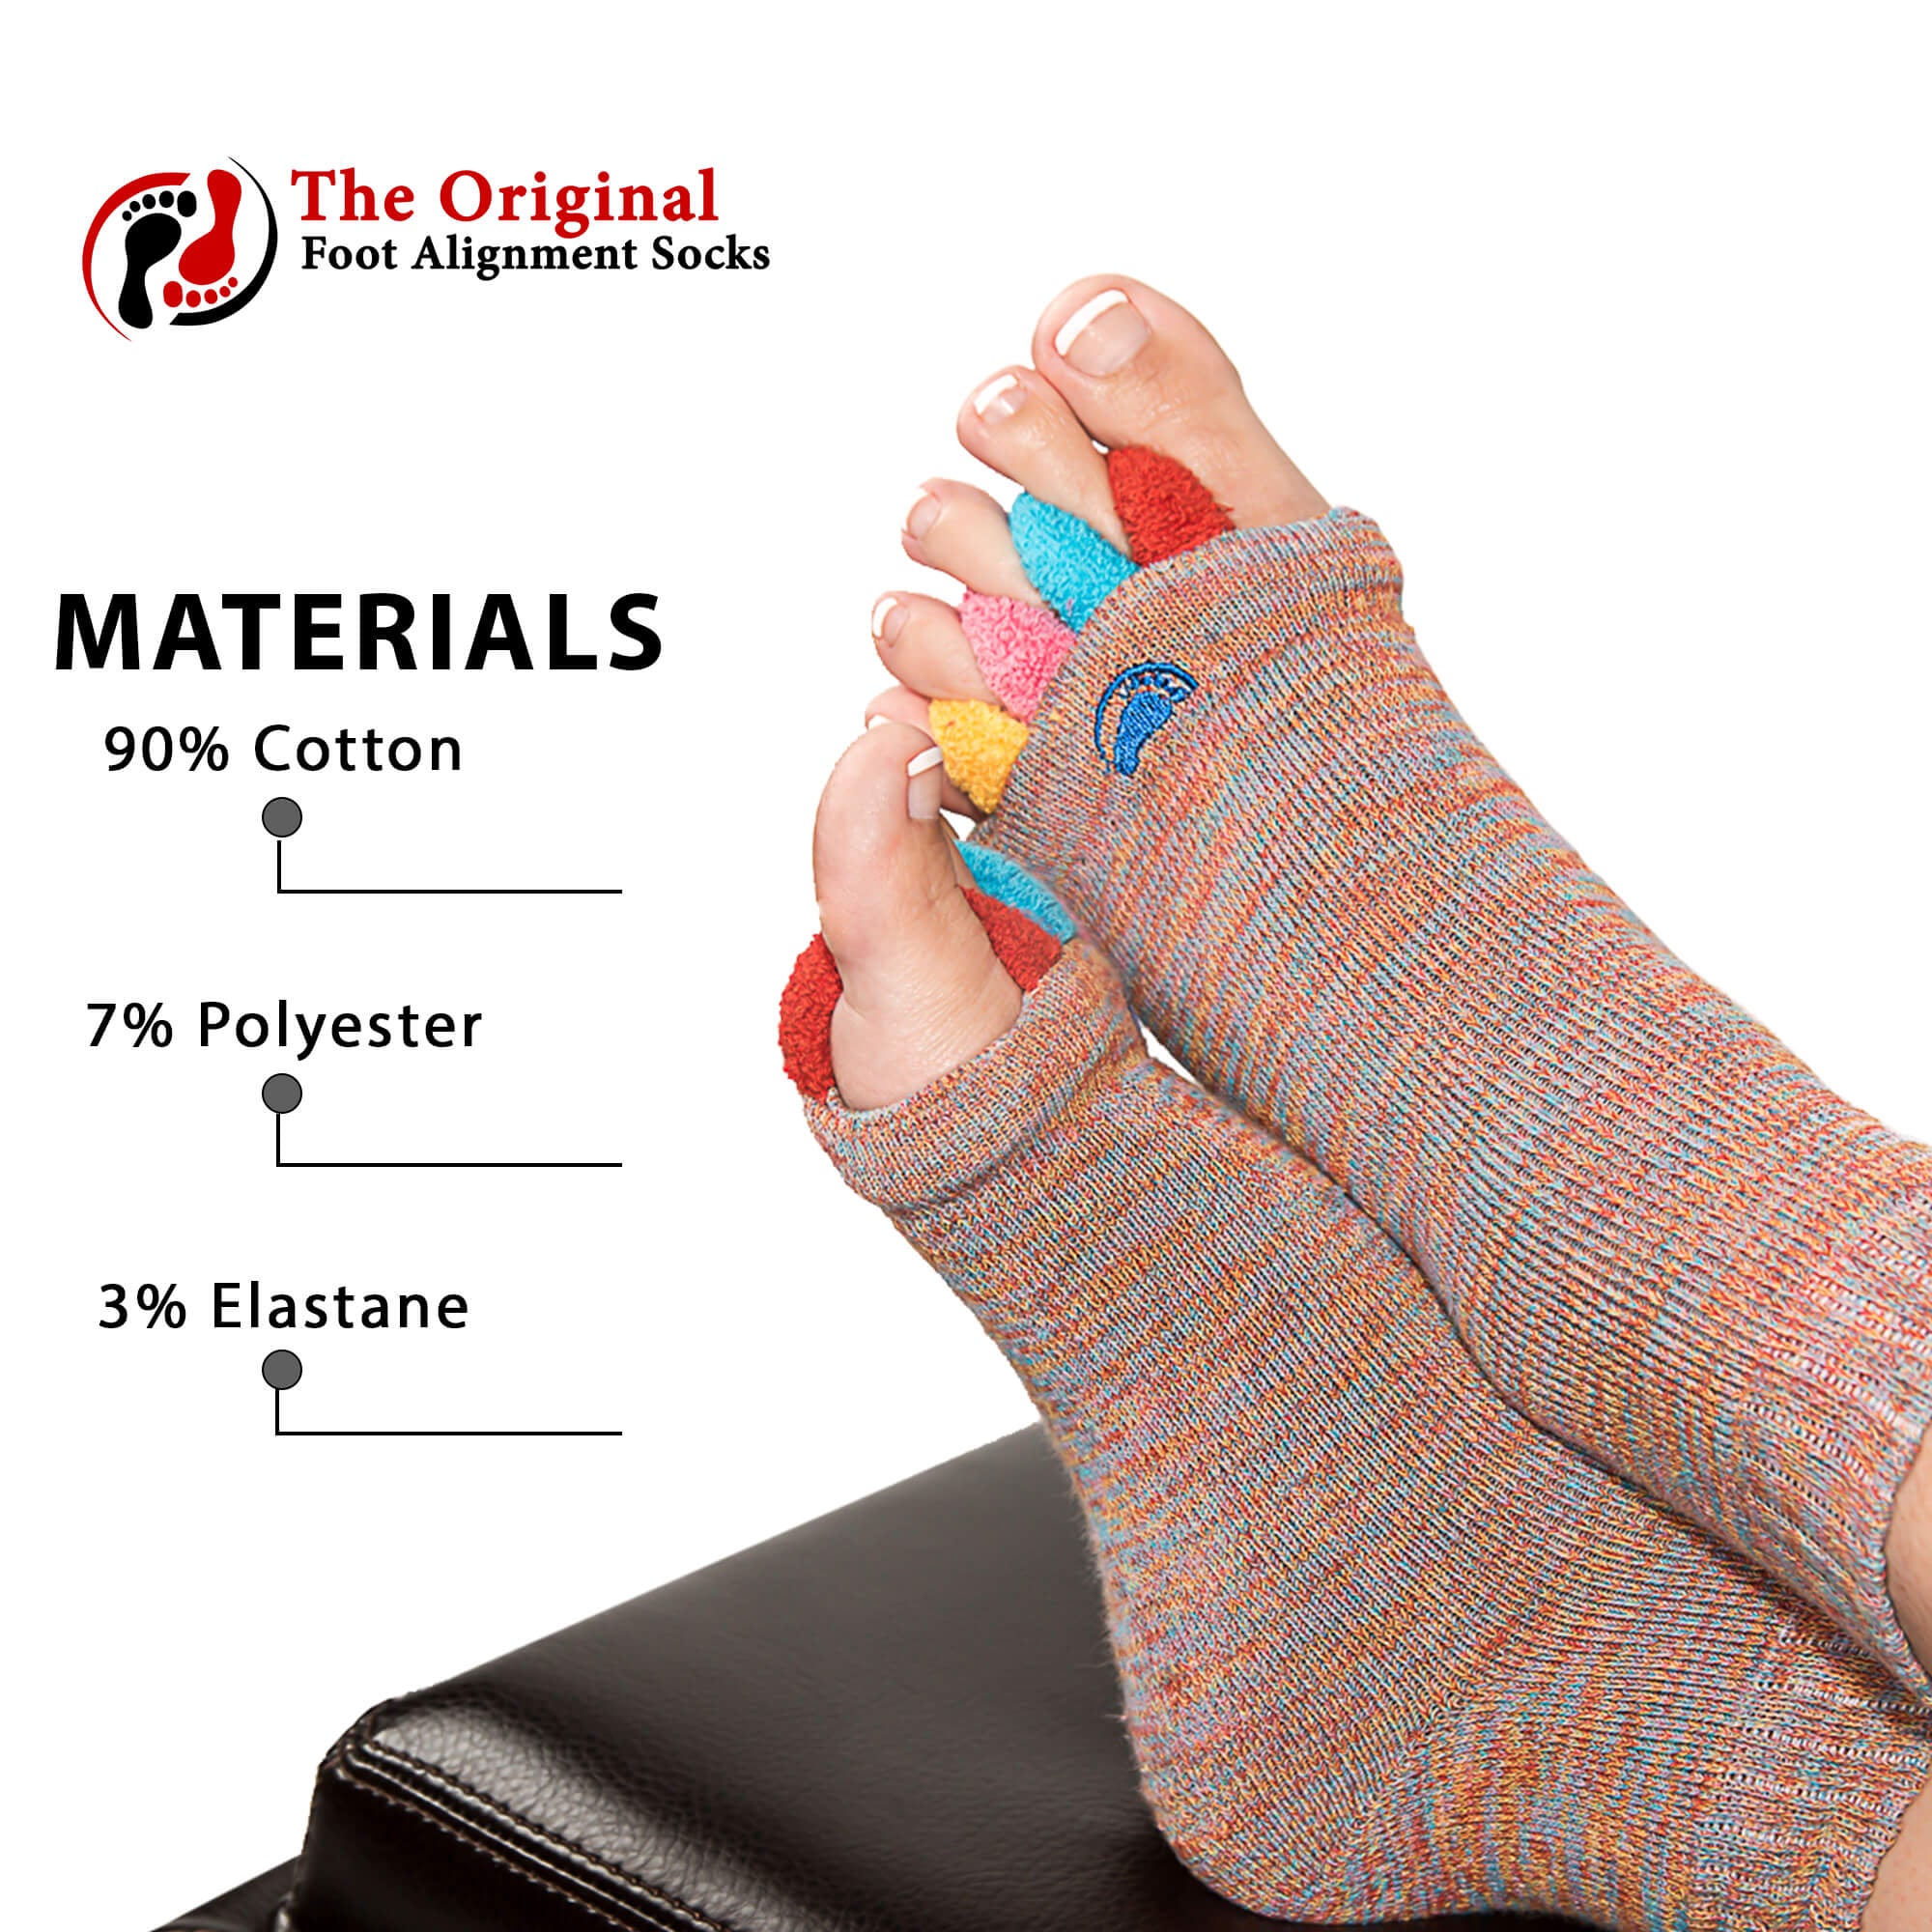 foot pain and sore feet relief with Cute Multi Color Alignment